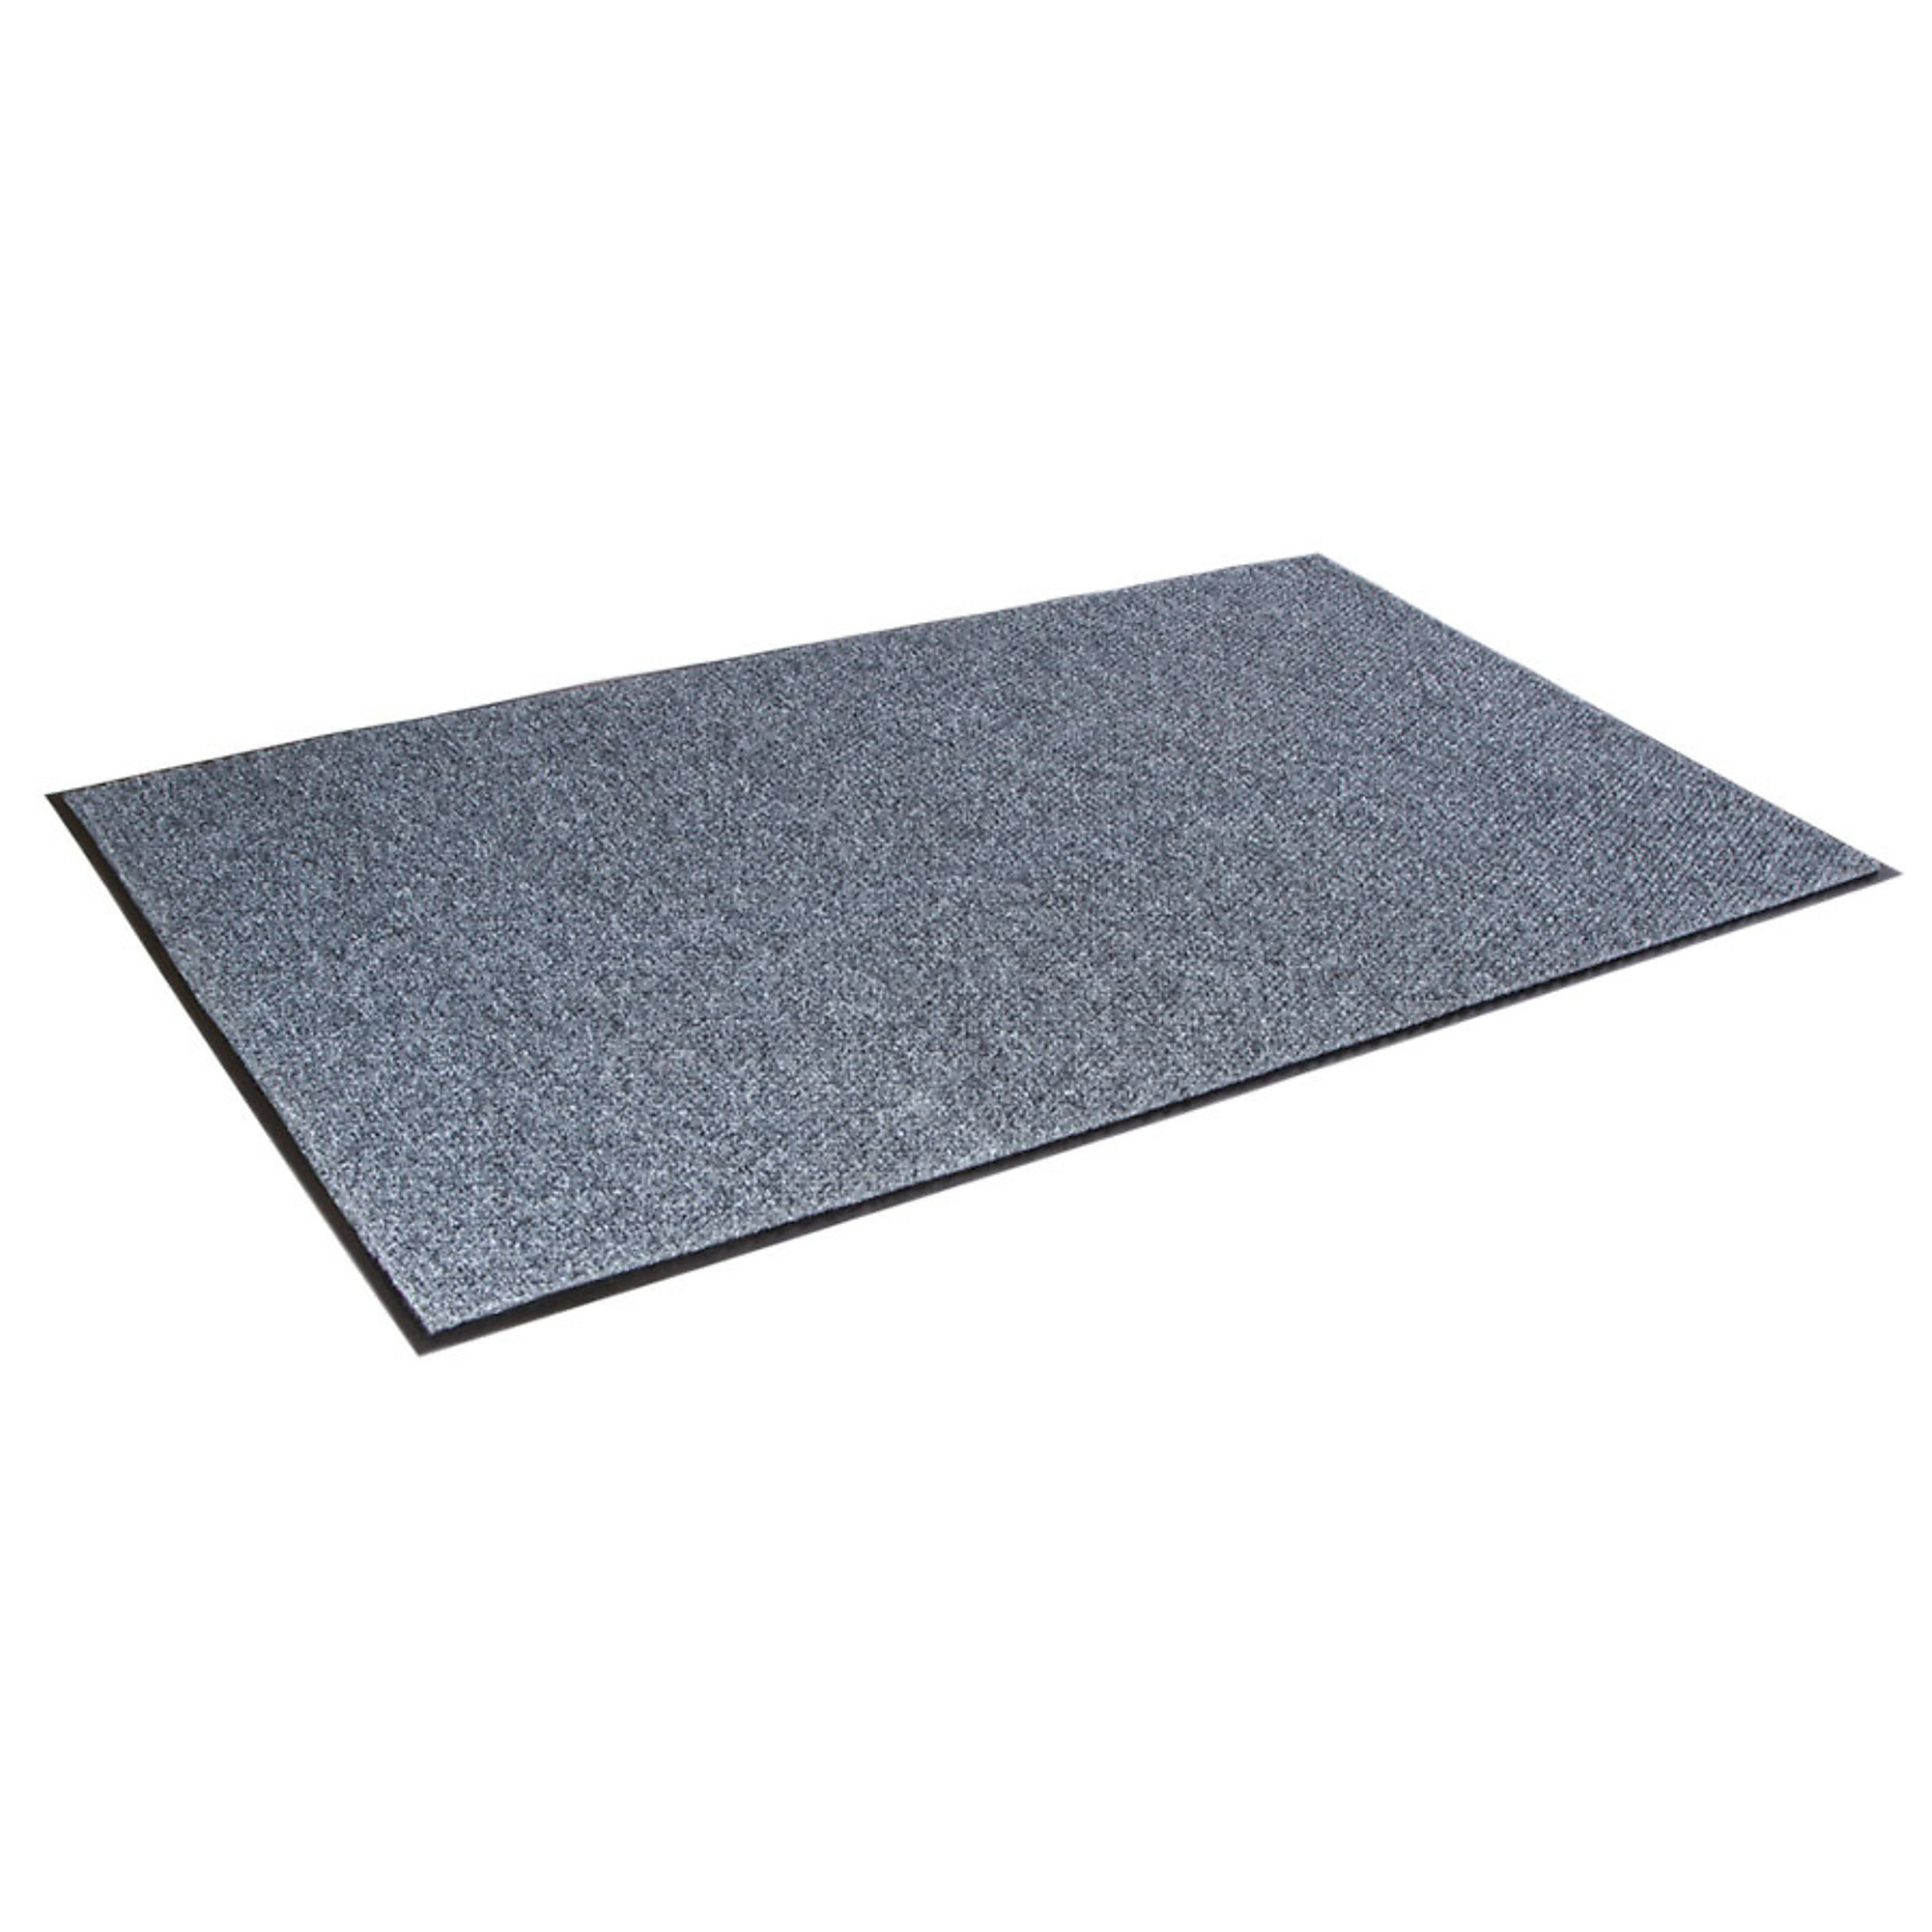 Crown Matting Technologies, Marathon 3ft.x5ft. Blue/Gray, Width 36 in, Length 60 in, Thickness 1/2 in, Model MN 0035BY